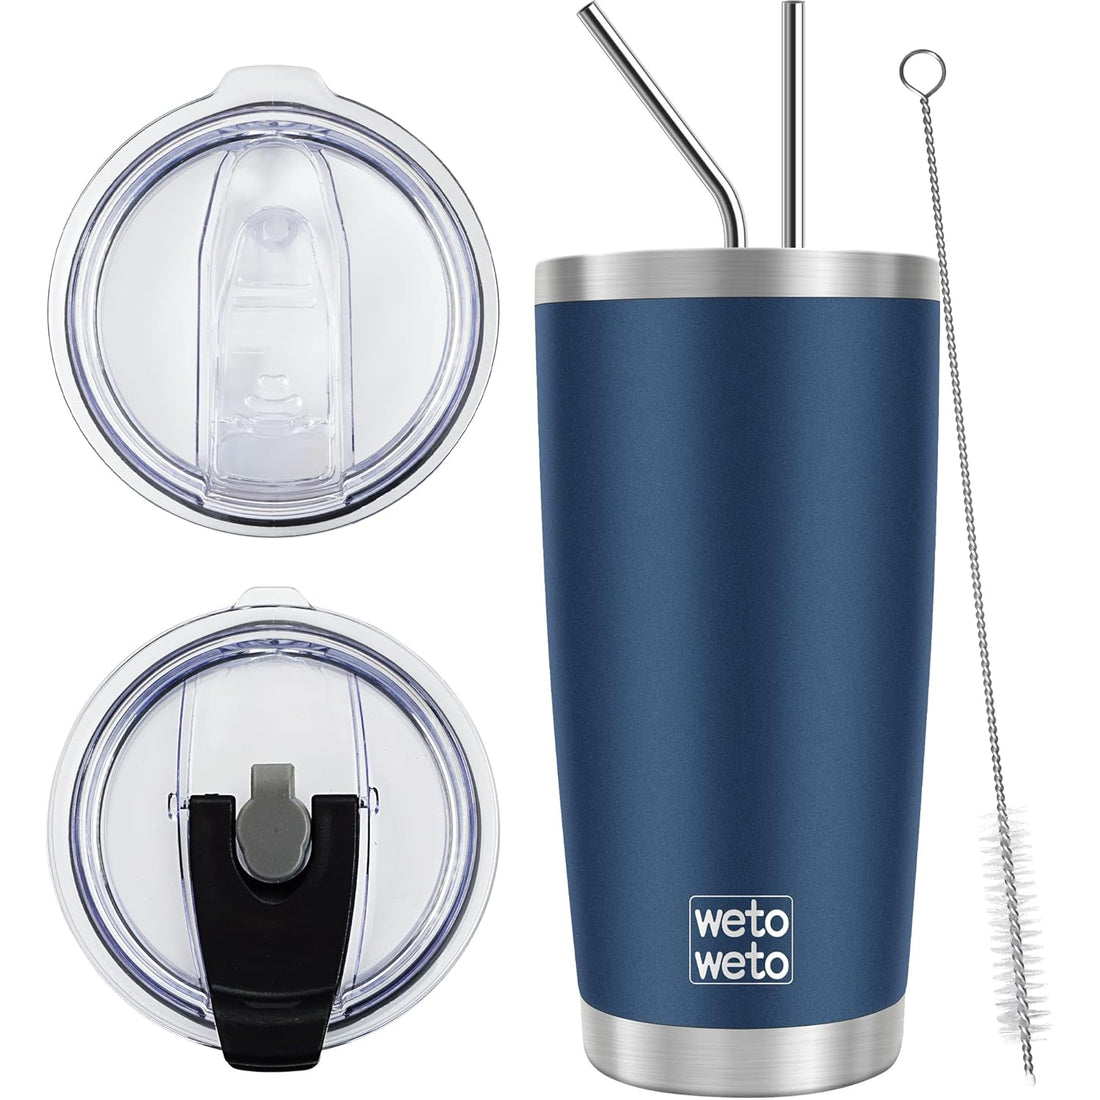 WETOWETO 20oz Tumbler with 2 lids and 2 straws, Stainless Steel Vacuum Insulated Water Coffee Tumbler Cup, Double Wall Powder Coated Spill-Proof Travel Mug Thermal Cup (Navy Blue, 1 Pack)